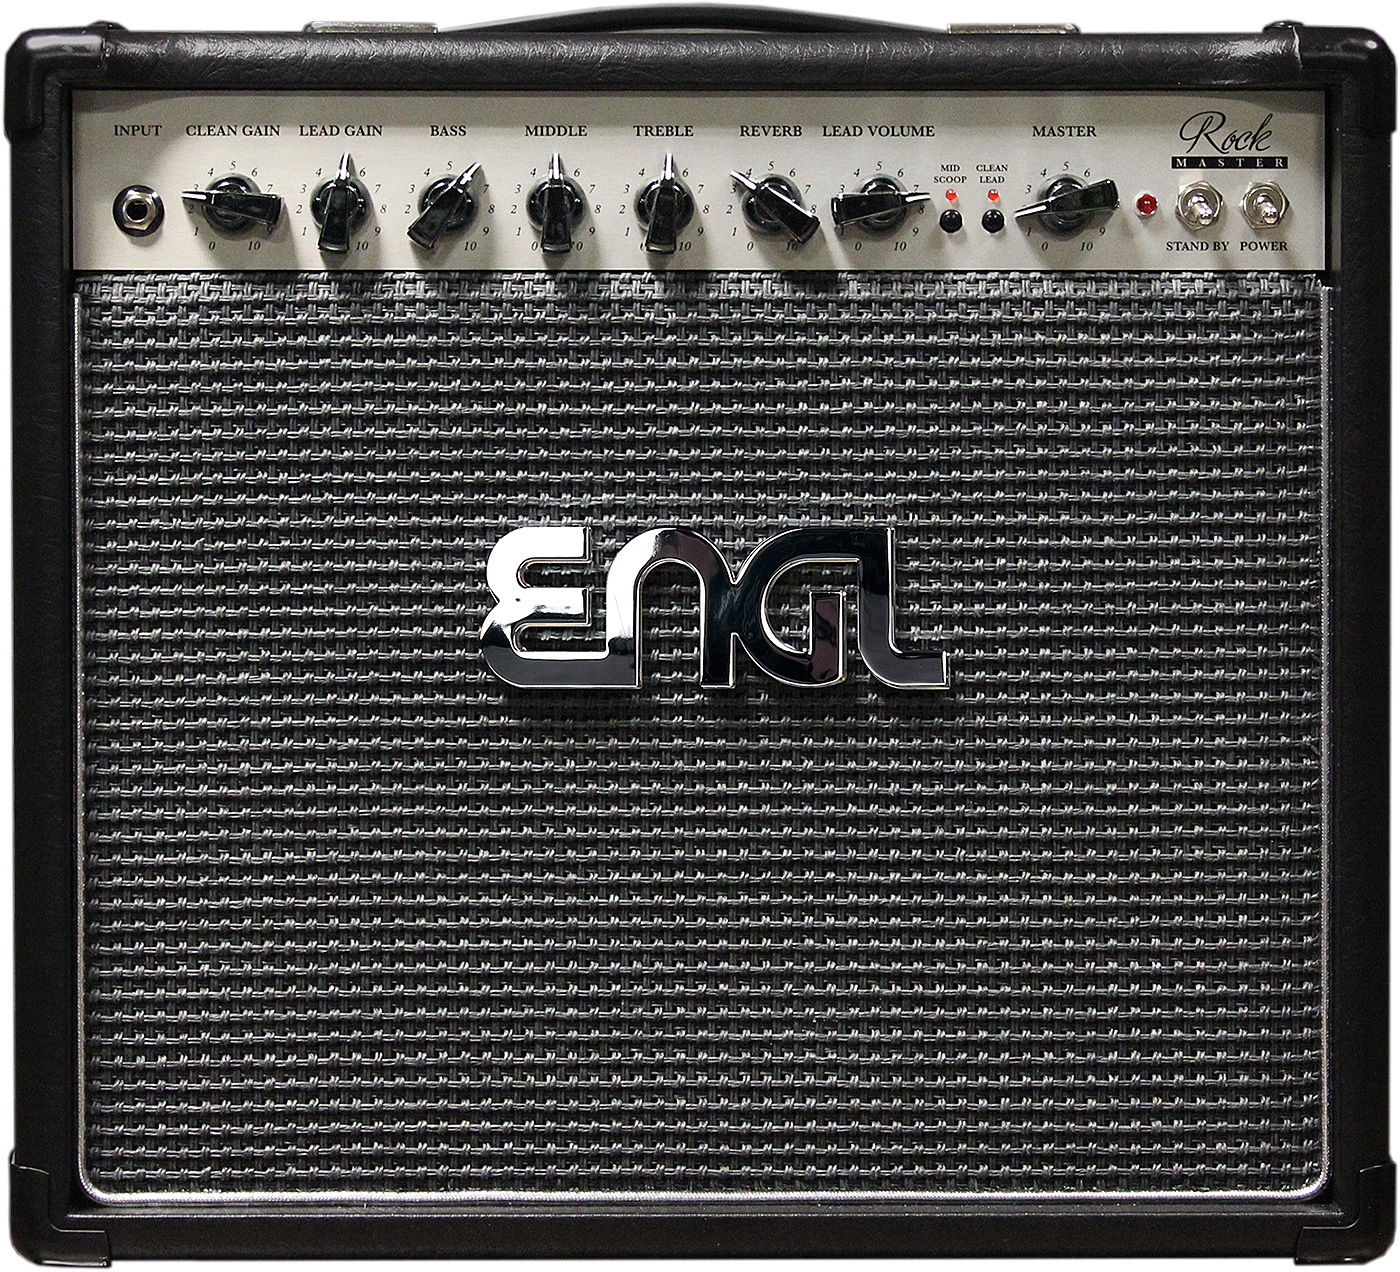 Engl Rockmaster 20 E302 - Electric guitar combo amp - Main picture